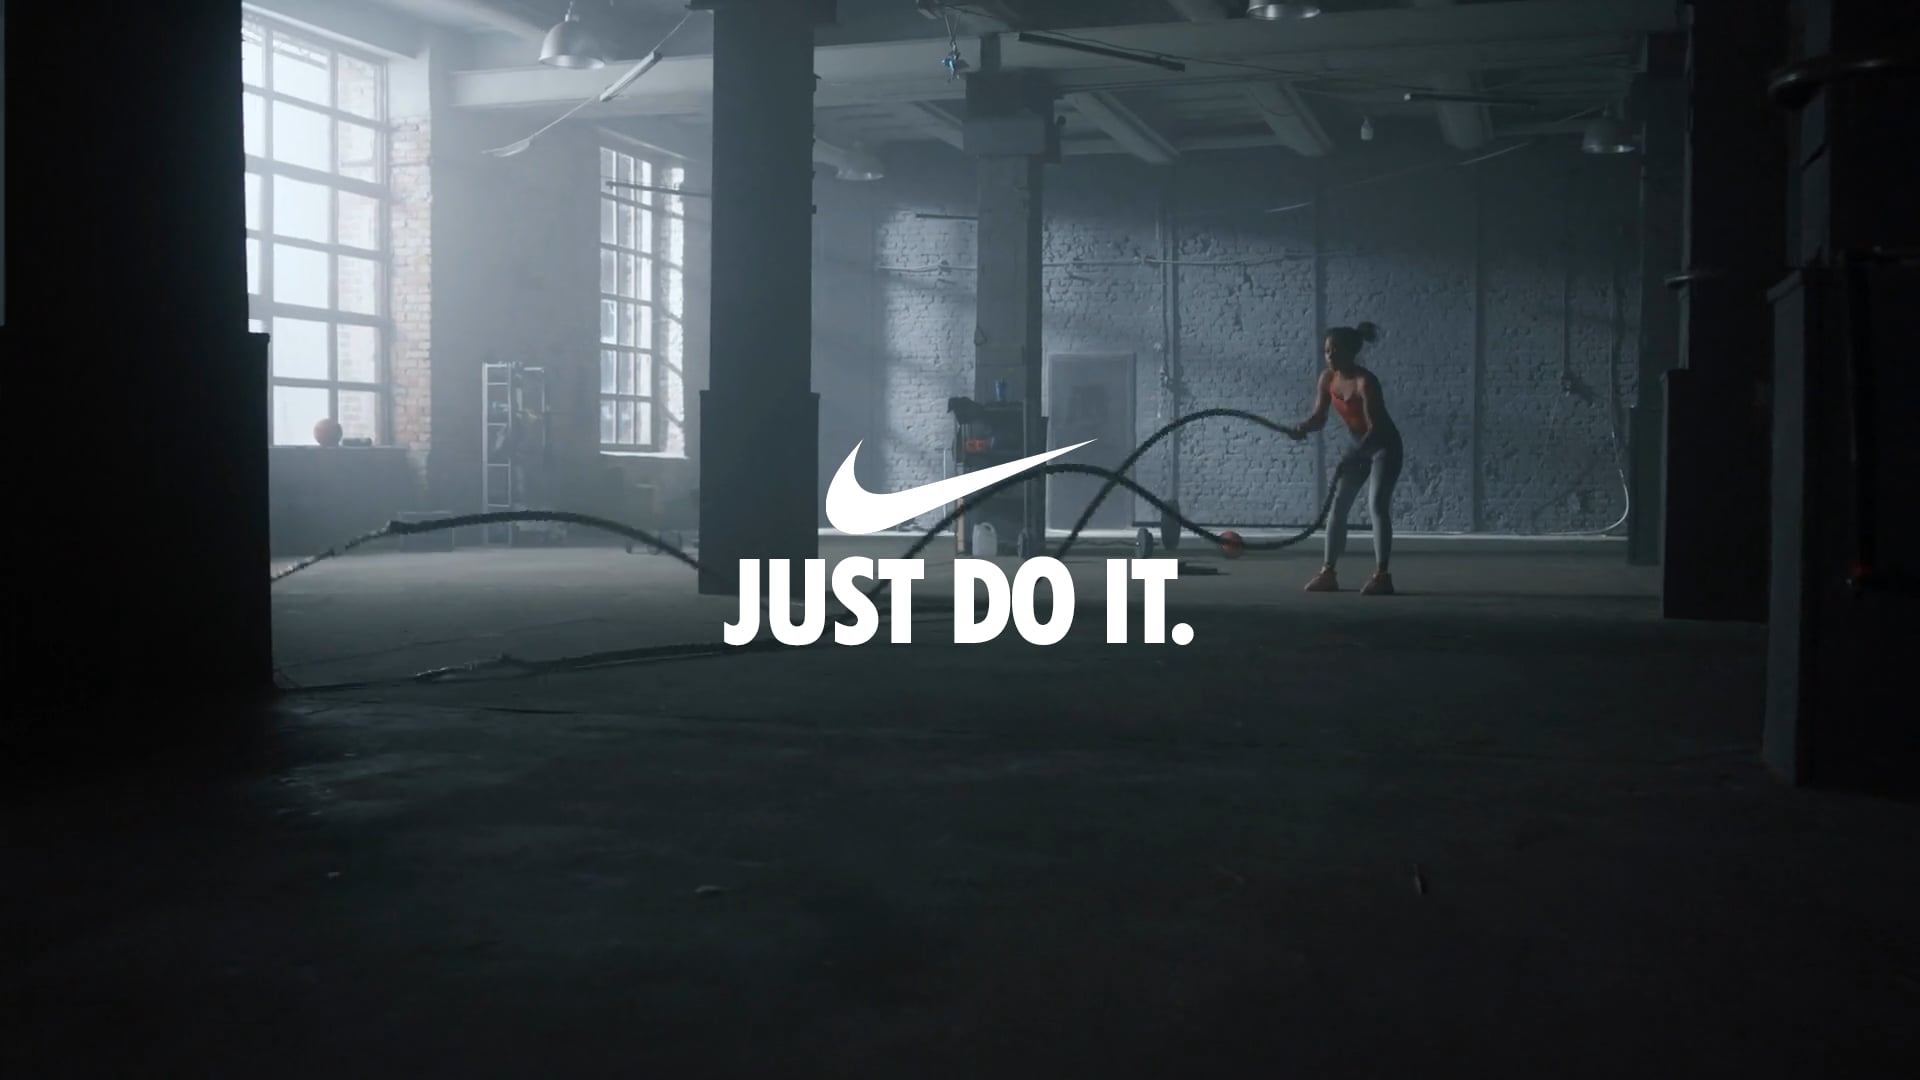 Commercial | Nike: Just Do It - Spec Ad